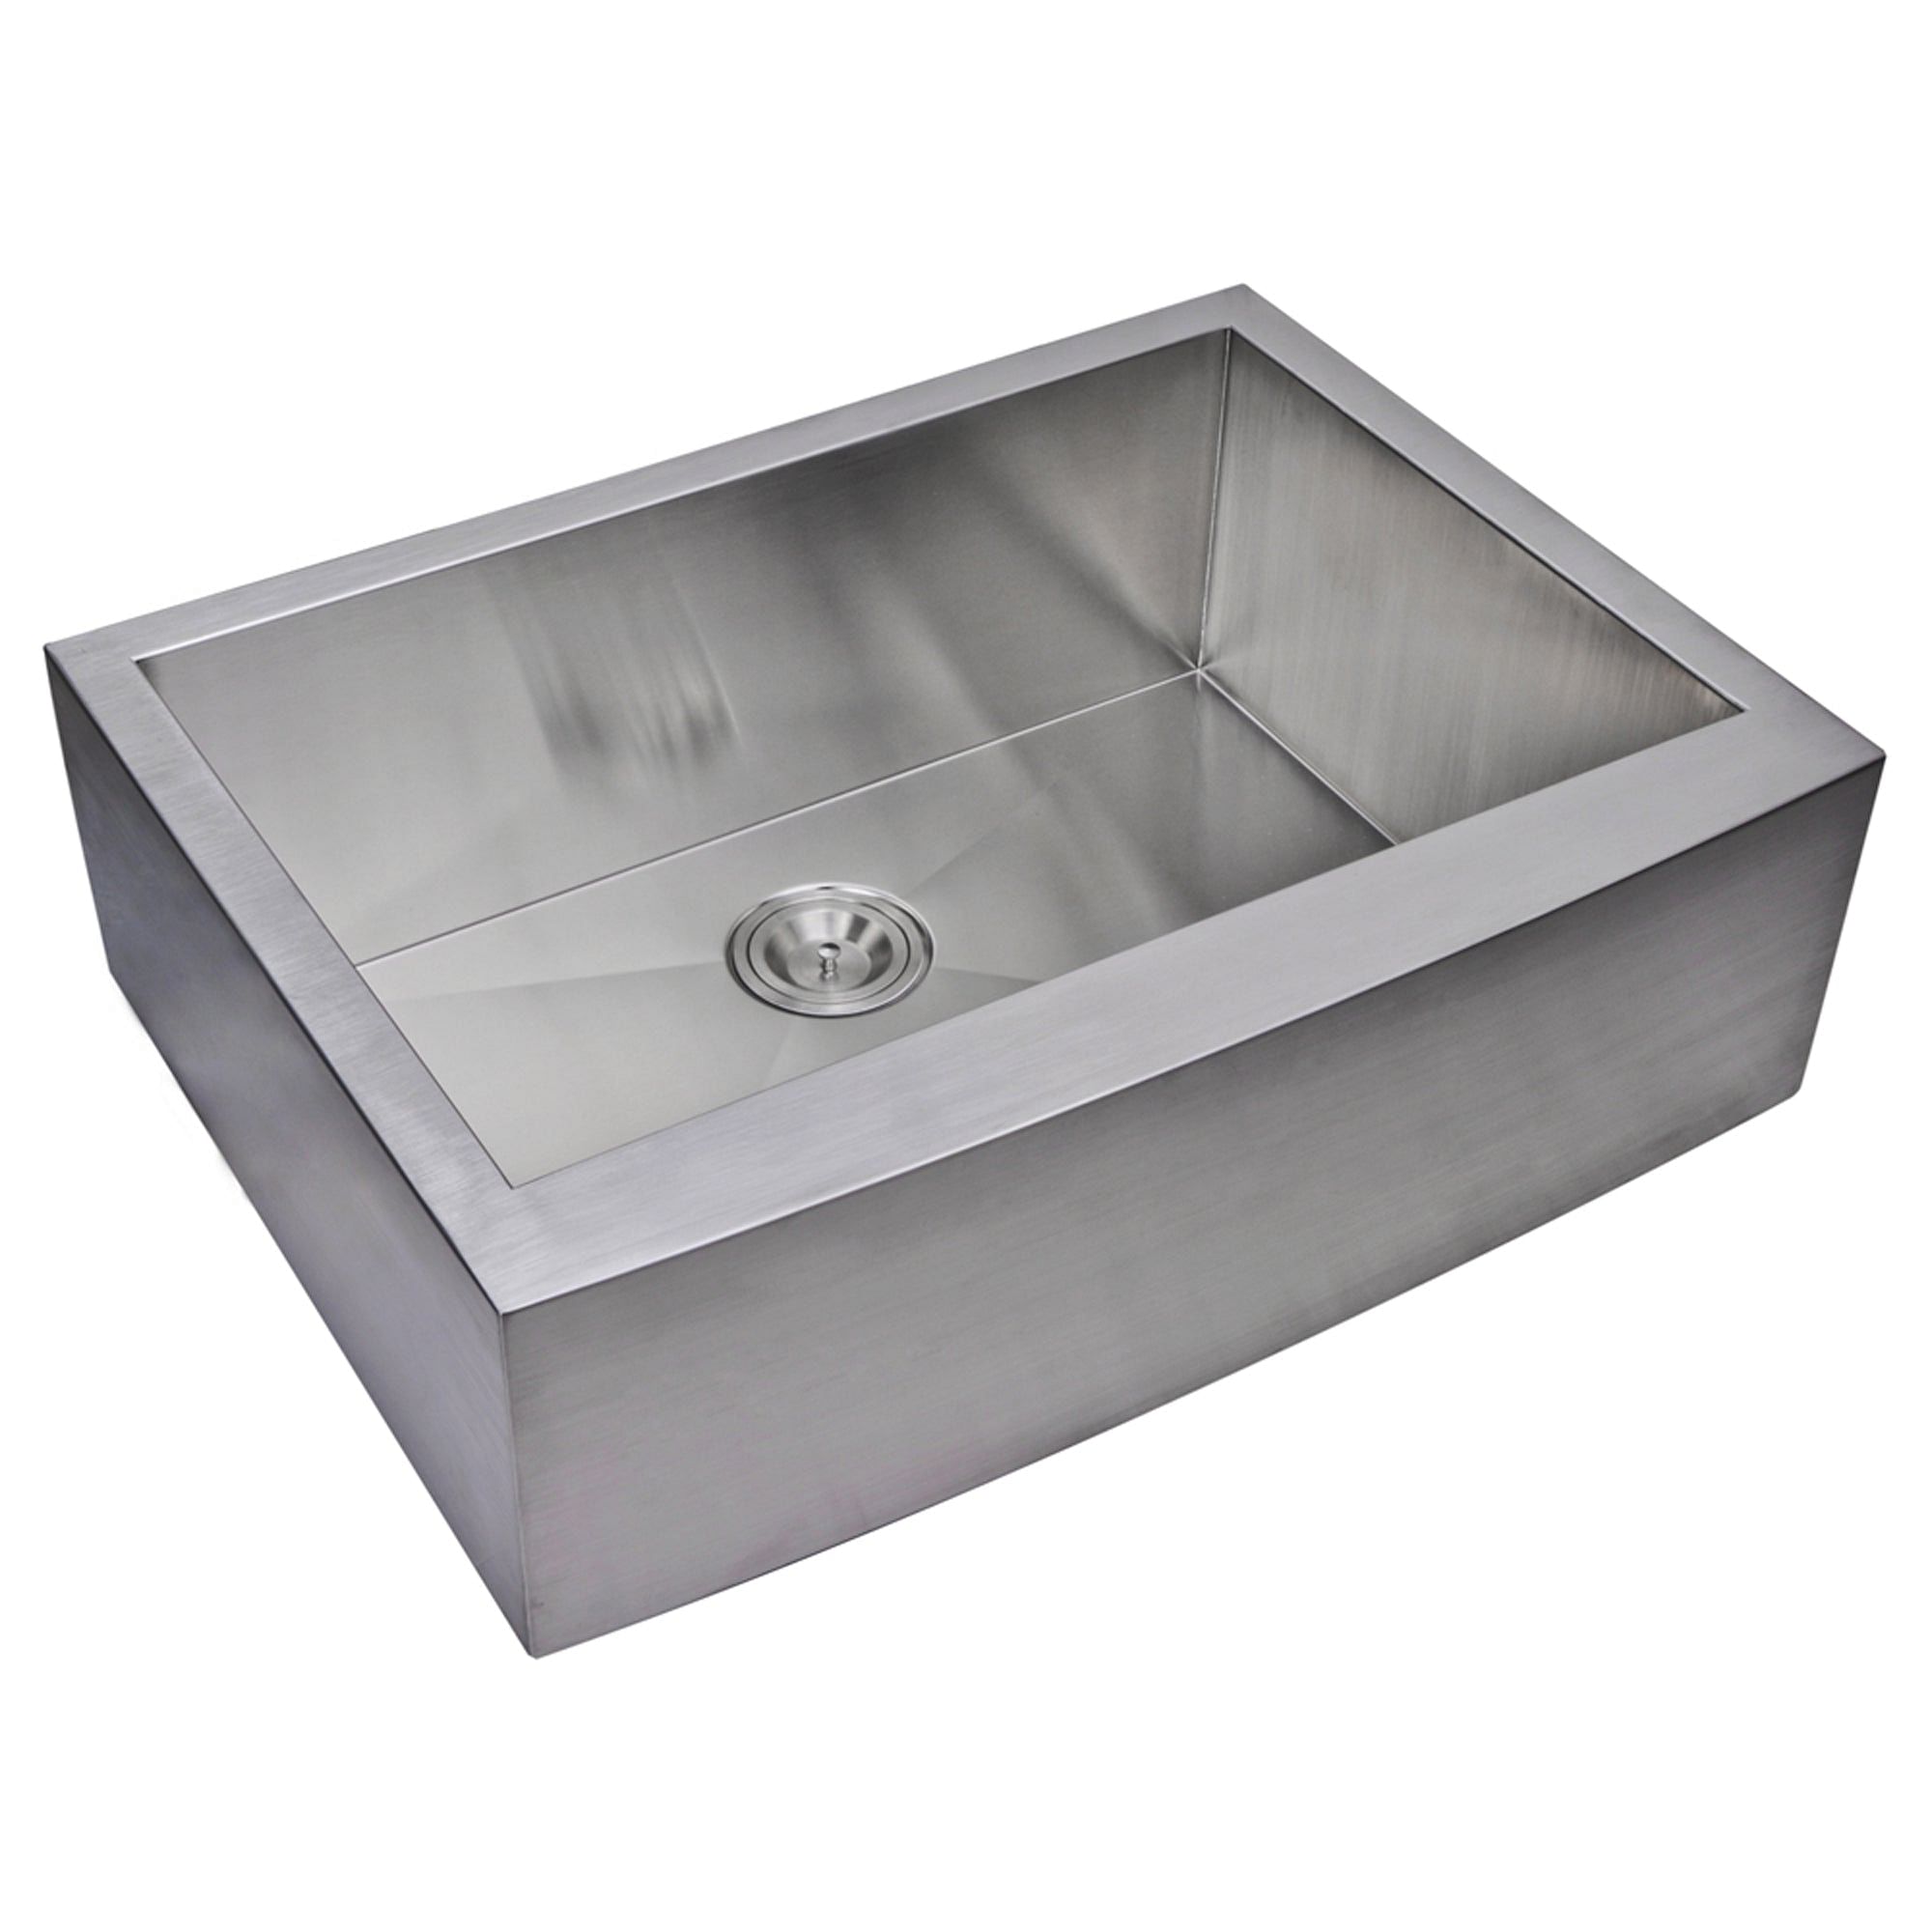 30 Inch X 22 Inch Zero Radius Single Bowl Stainless Steel Hand Made Apron Front Kitchen Sink With Drain and Strainer